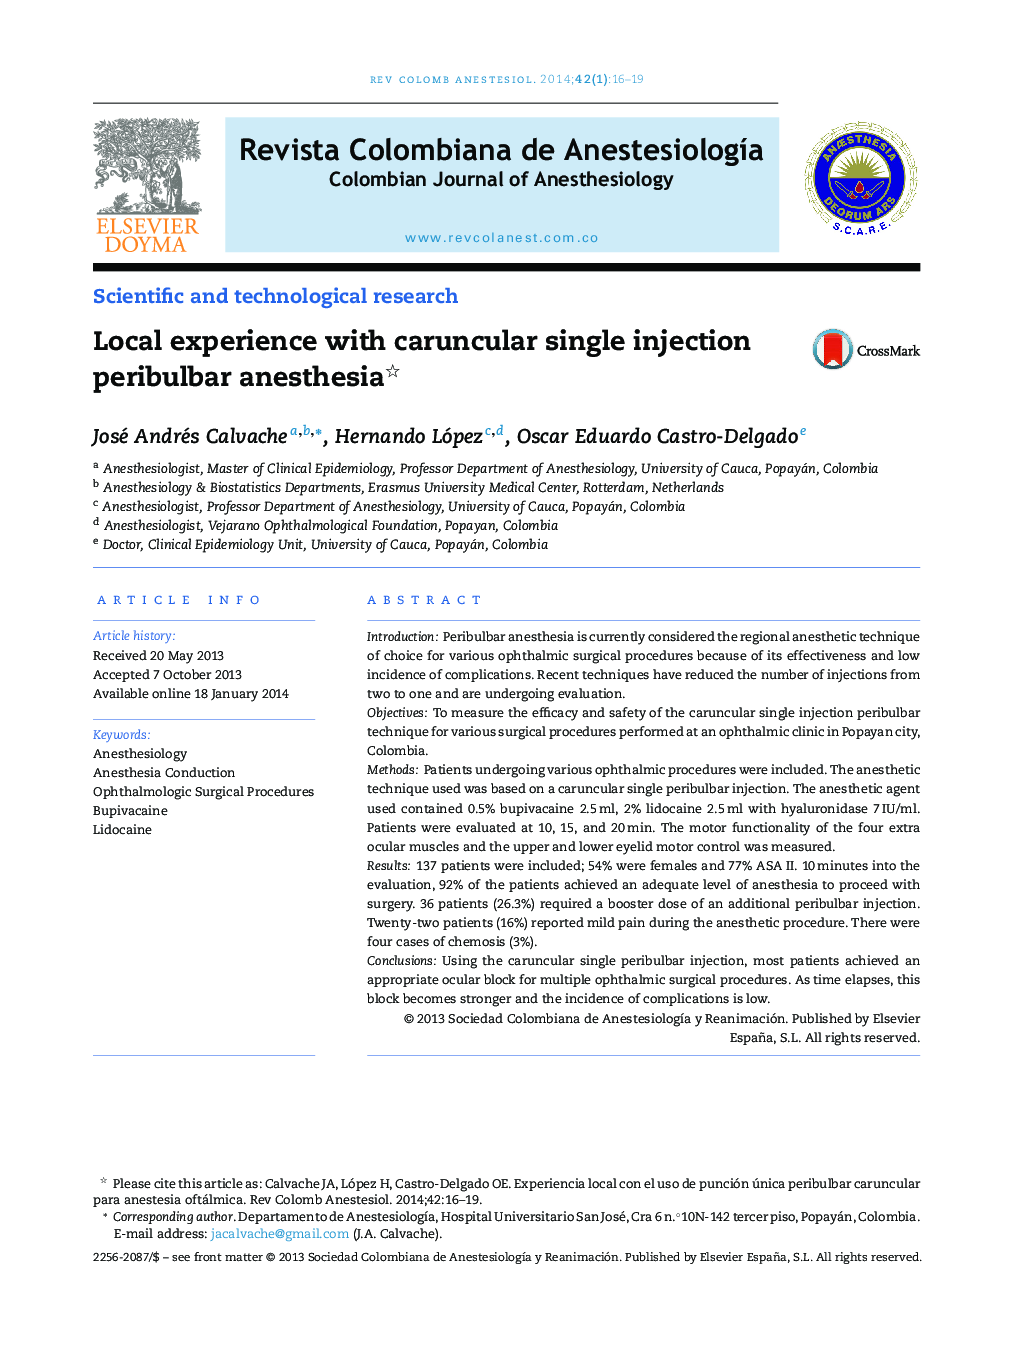 Local experience with caruncular single injection peribulbar anesthesia 